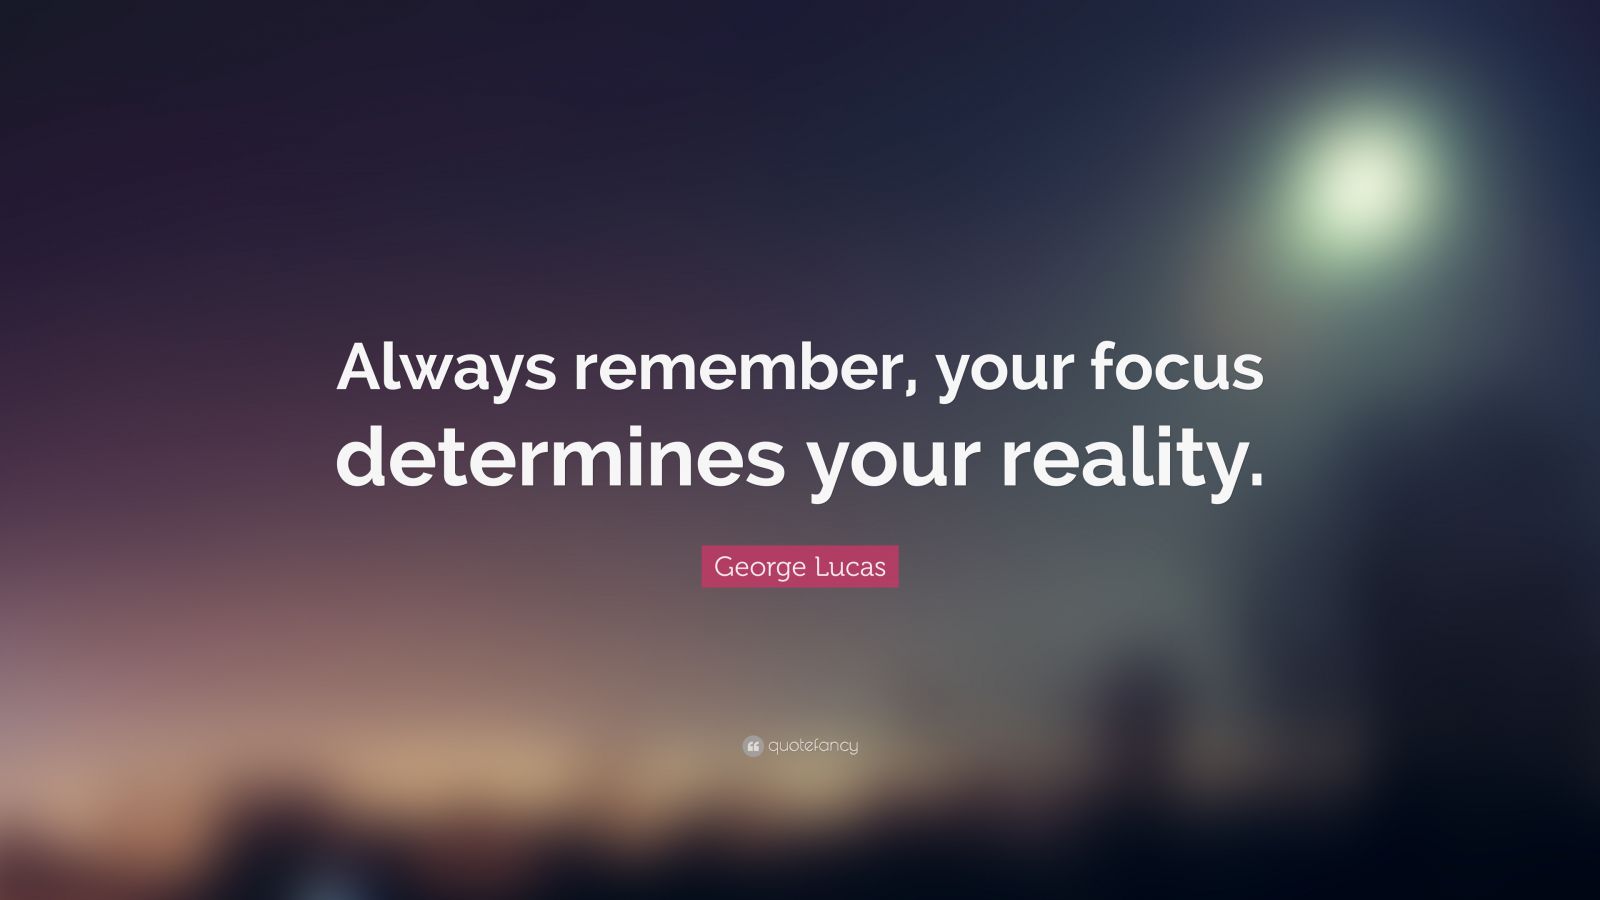 George Lucas Quote: “Always remember, your focus determines your ...